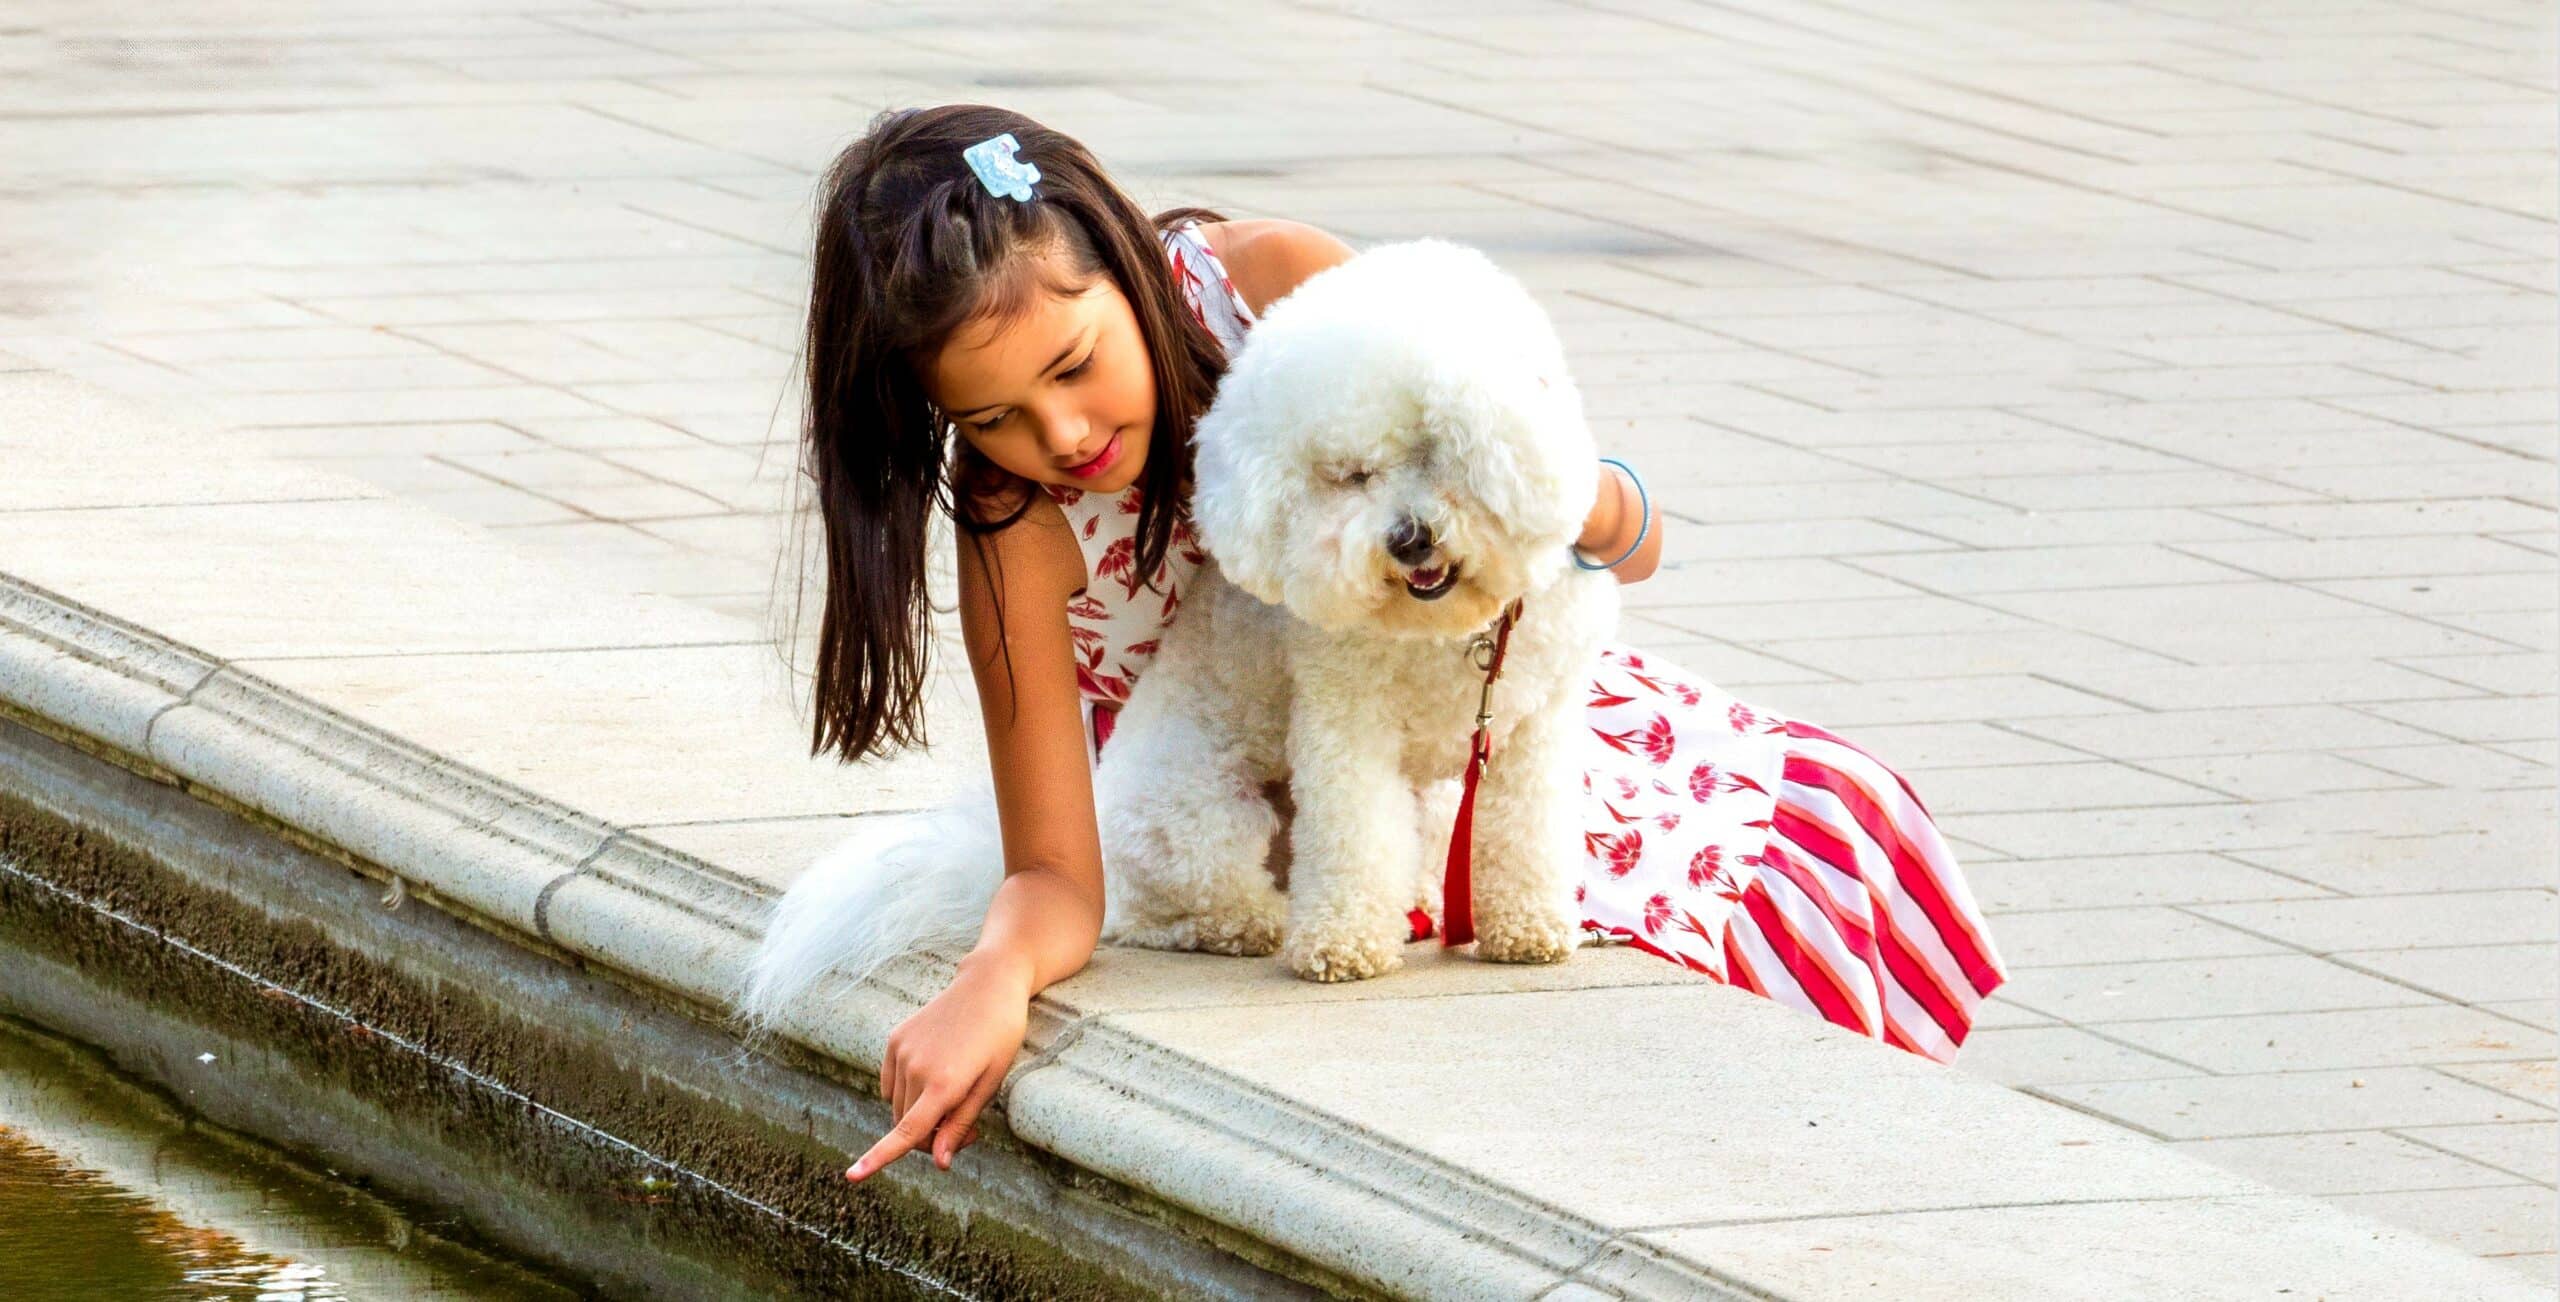 Little girl sitting with her dog by a fountain in a Las Vegas park, enjoying a sunny day safely